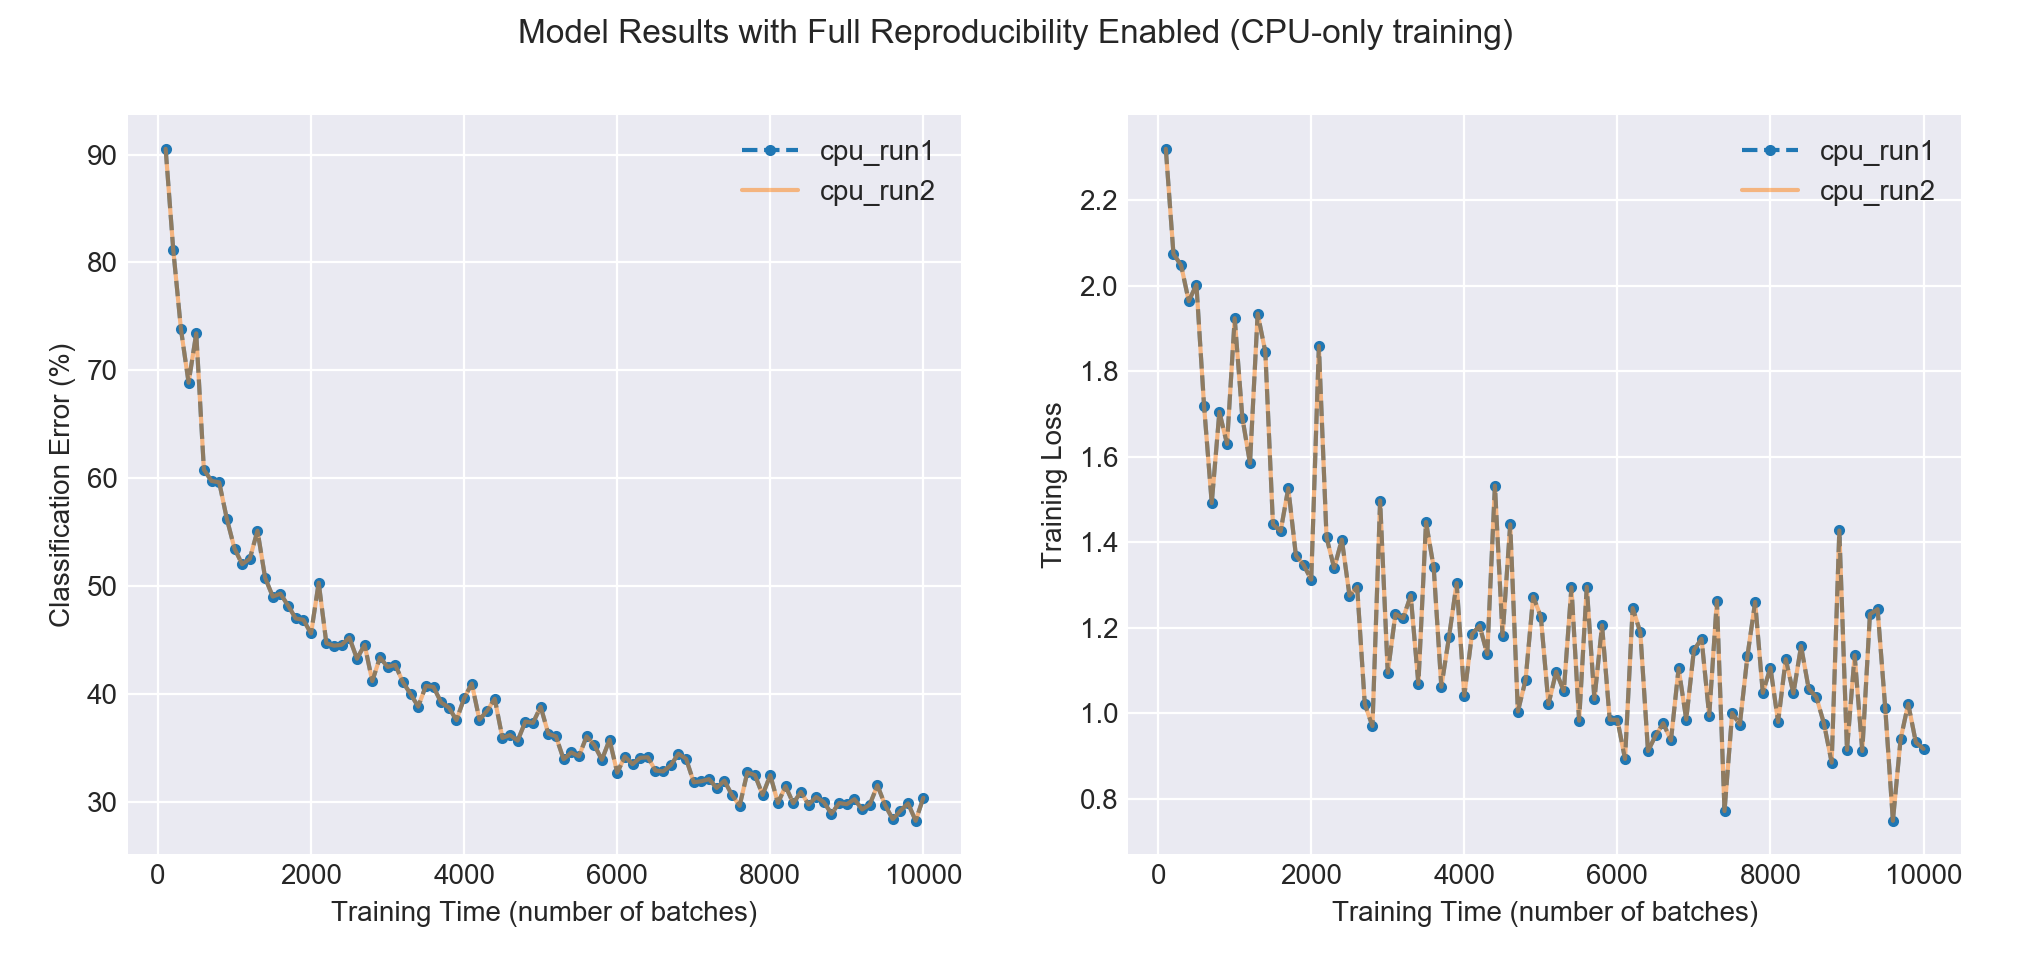 By performing CPU-only training, we can achieve perfect reproducibility.